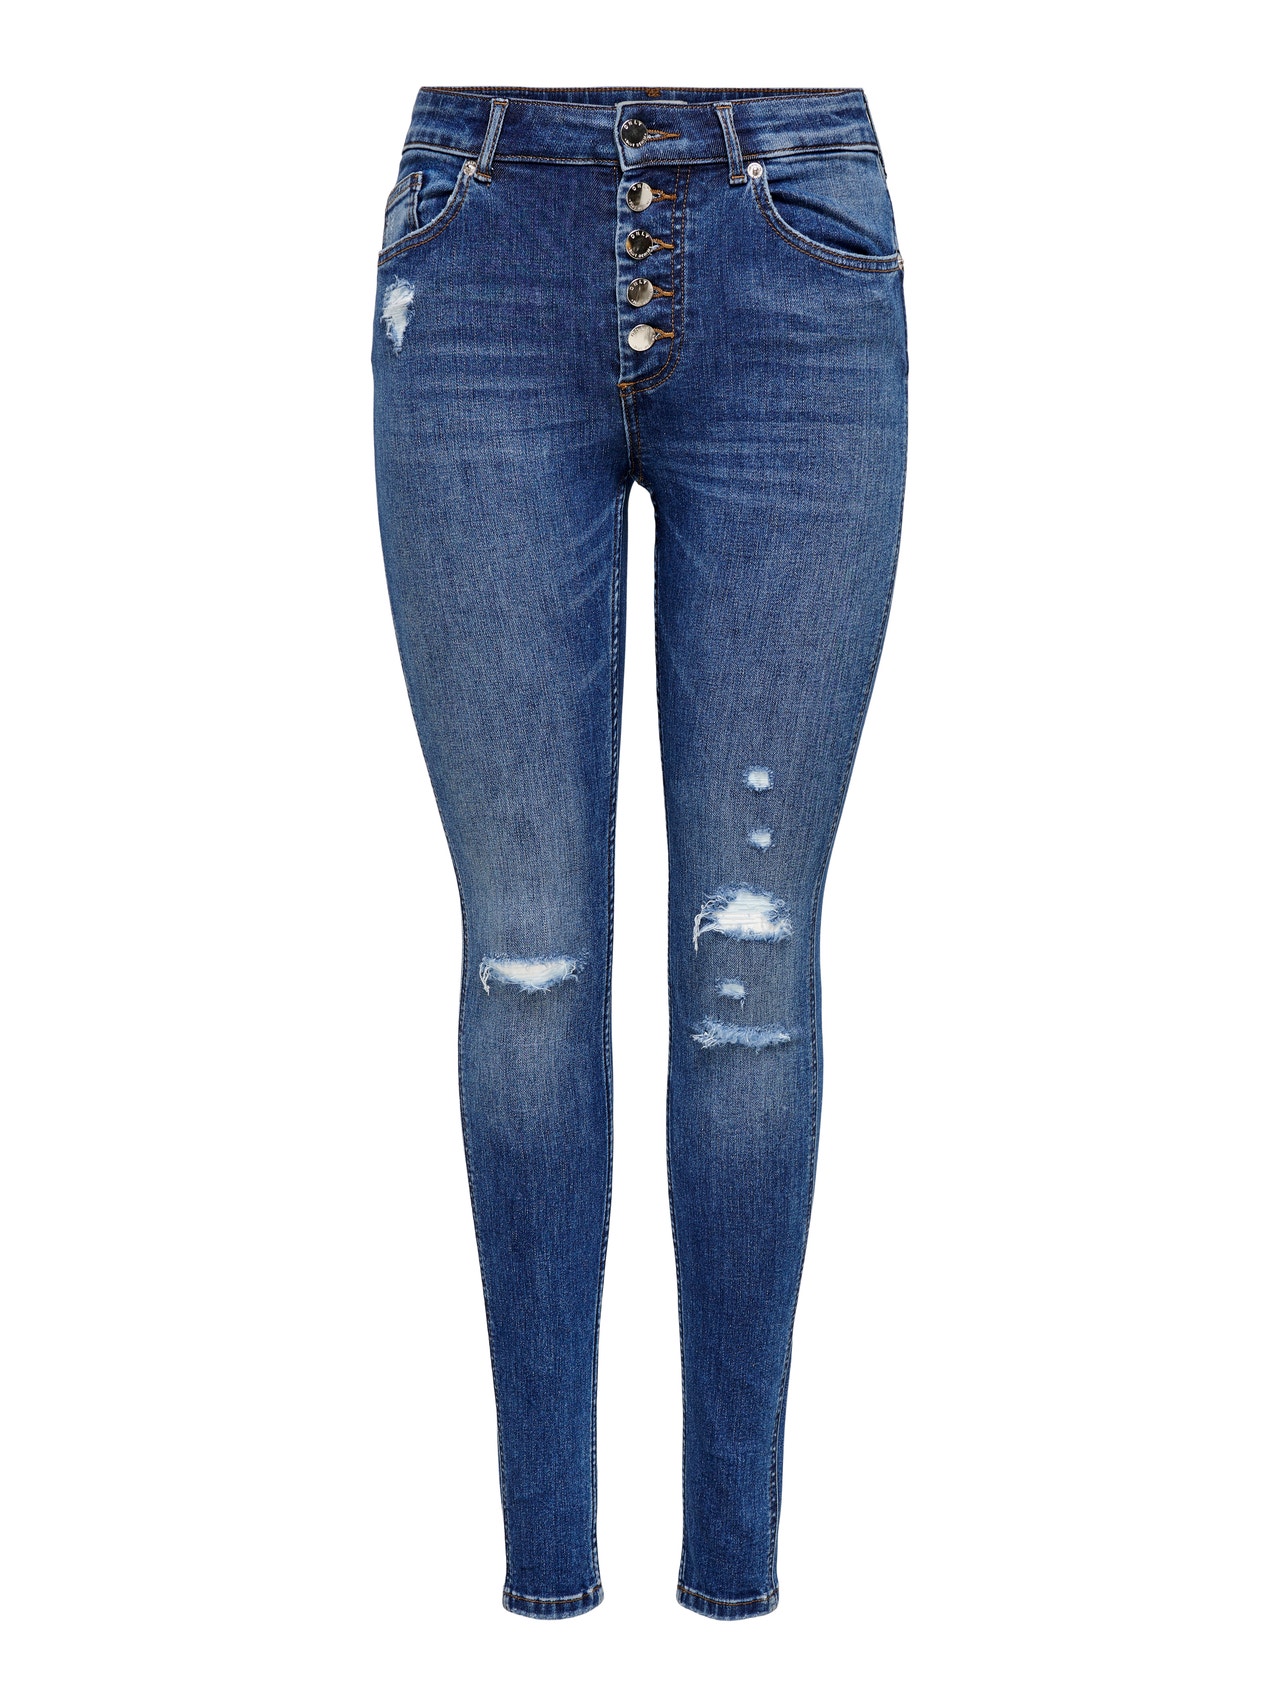 ONLY Jeans Skinny Fit Taille moyenne Petite -Medium Blue Denim - 15268211